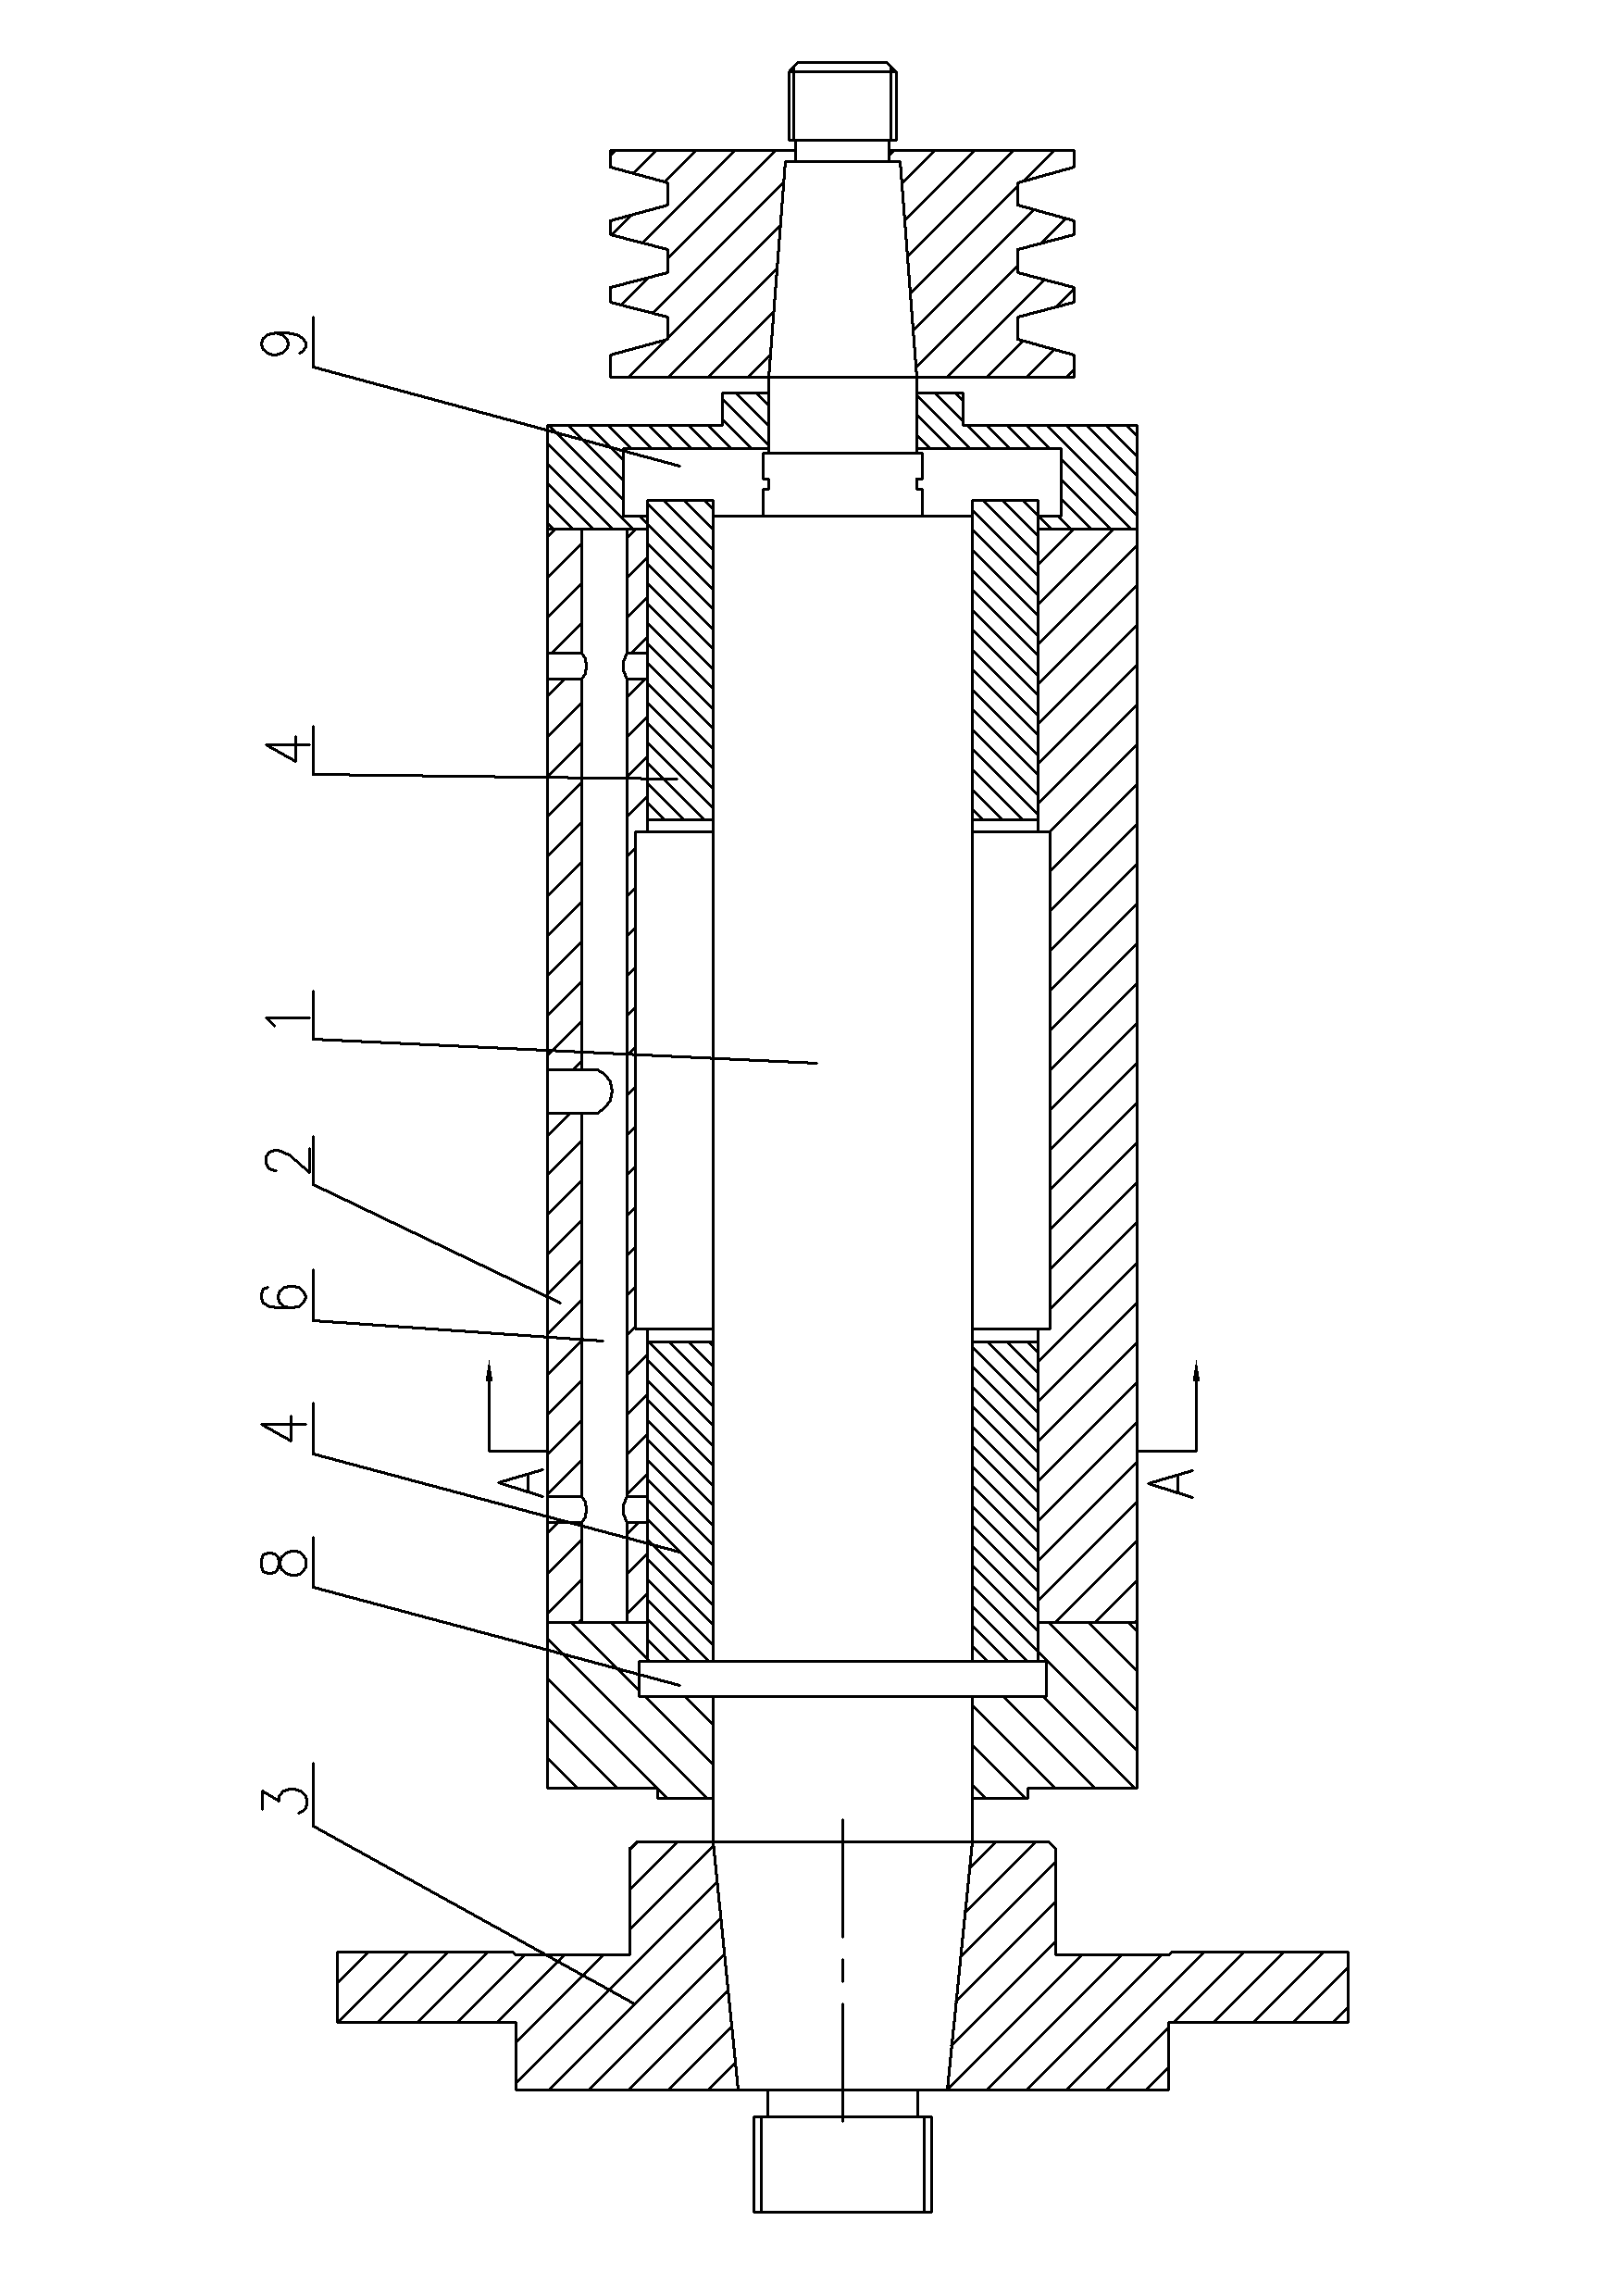 Main shaft supporting structure of centerless grinder for grinding valve lock groove